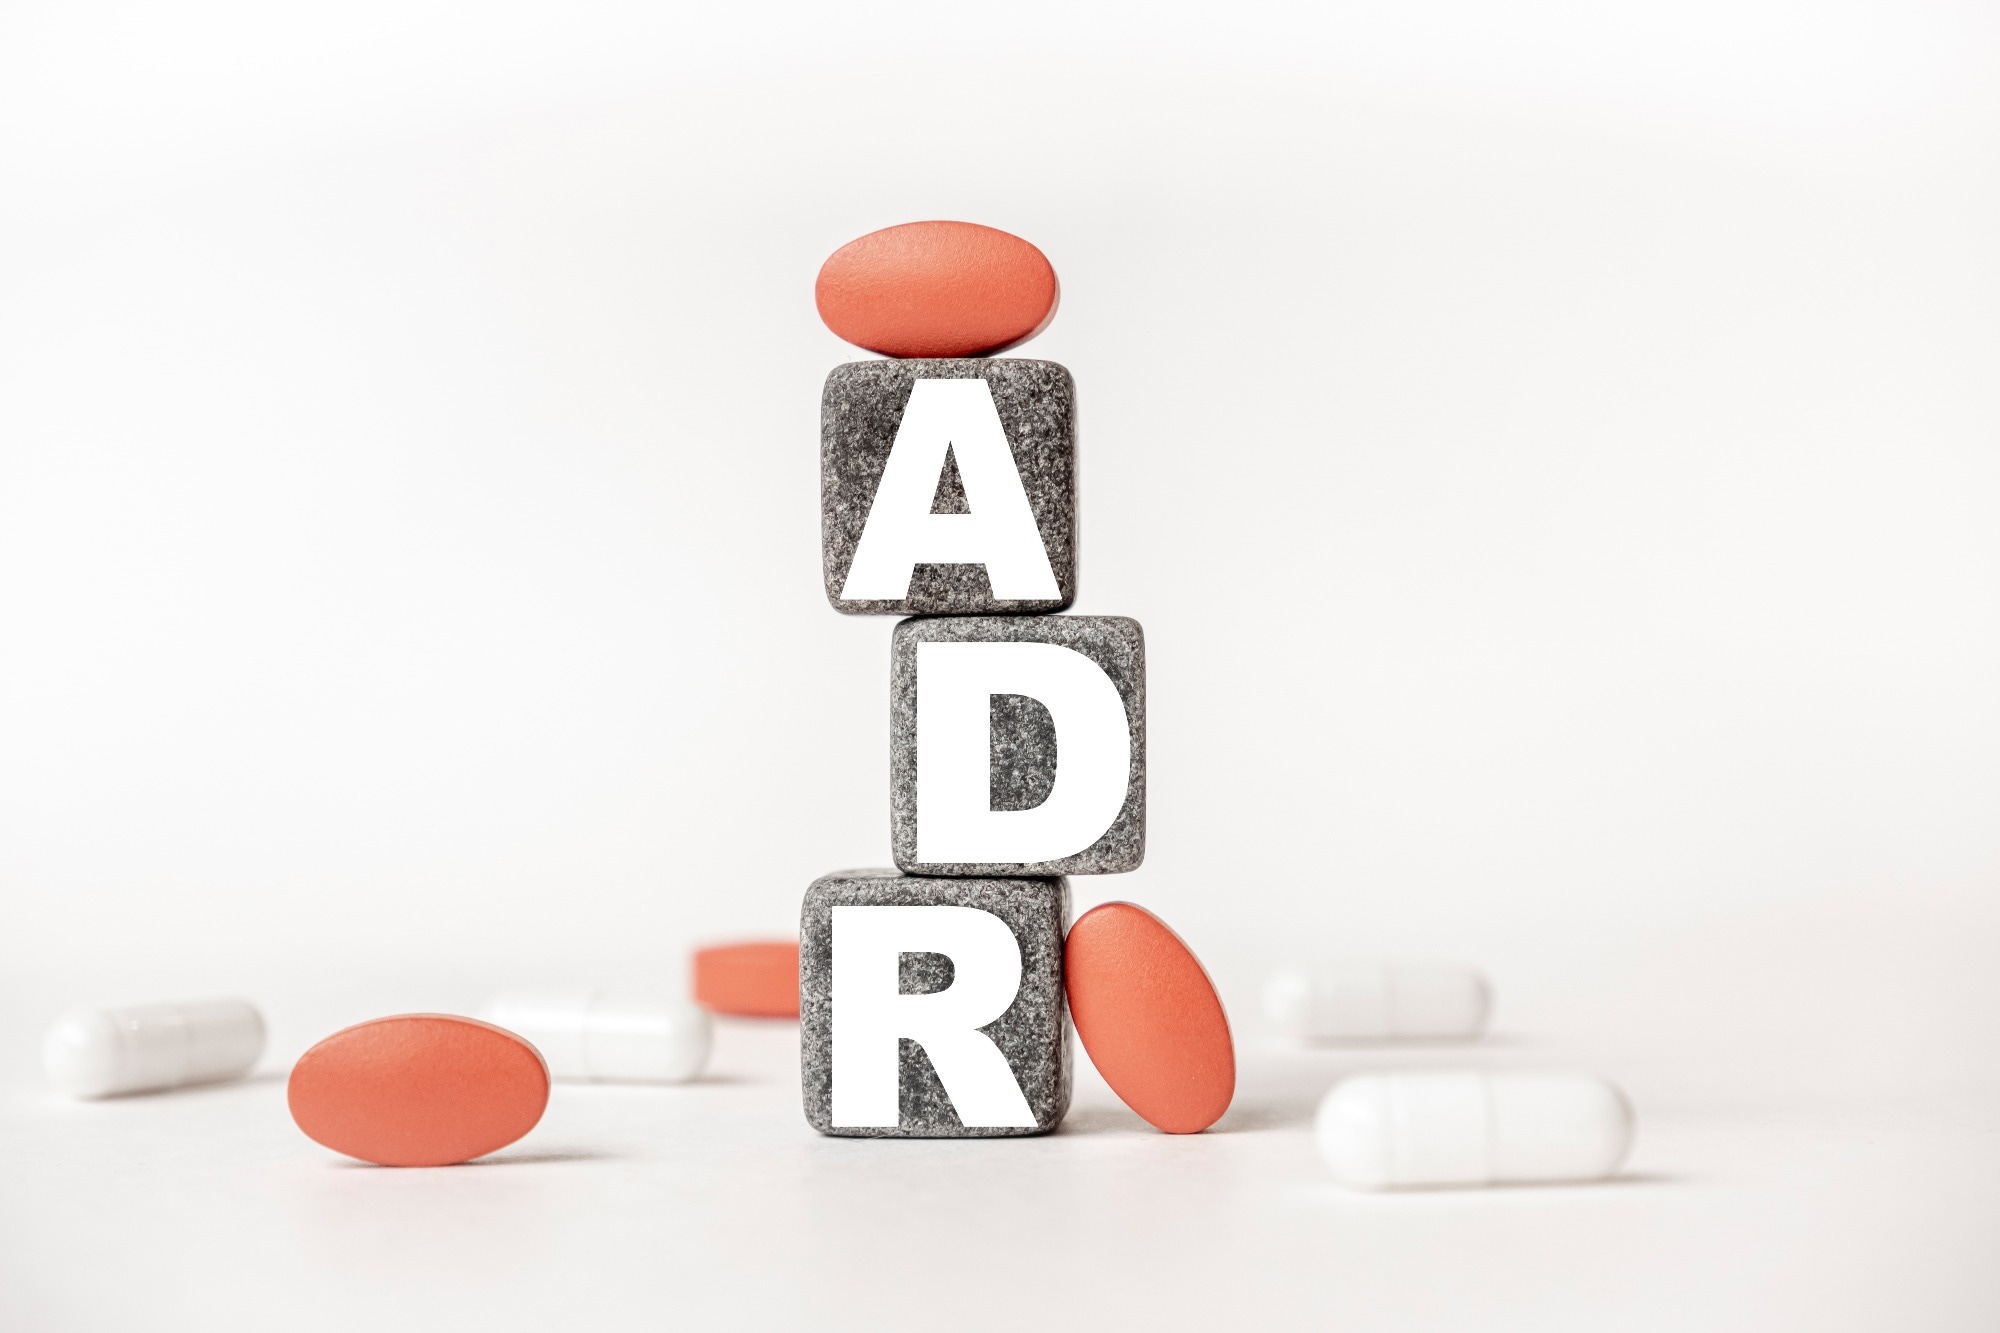 Study: A 12-gene pharmacogenetic panel to prevent adverse drug reactions: an open-label, multicentre, controlled, cluster-randomised crossover implementation study. Image Credit: Lana Leon/Shutterstock